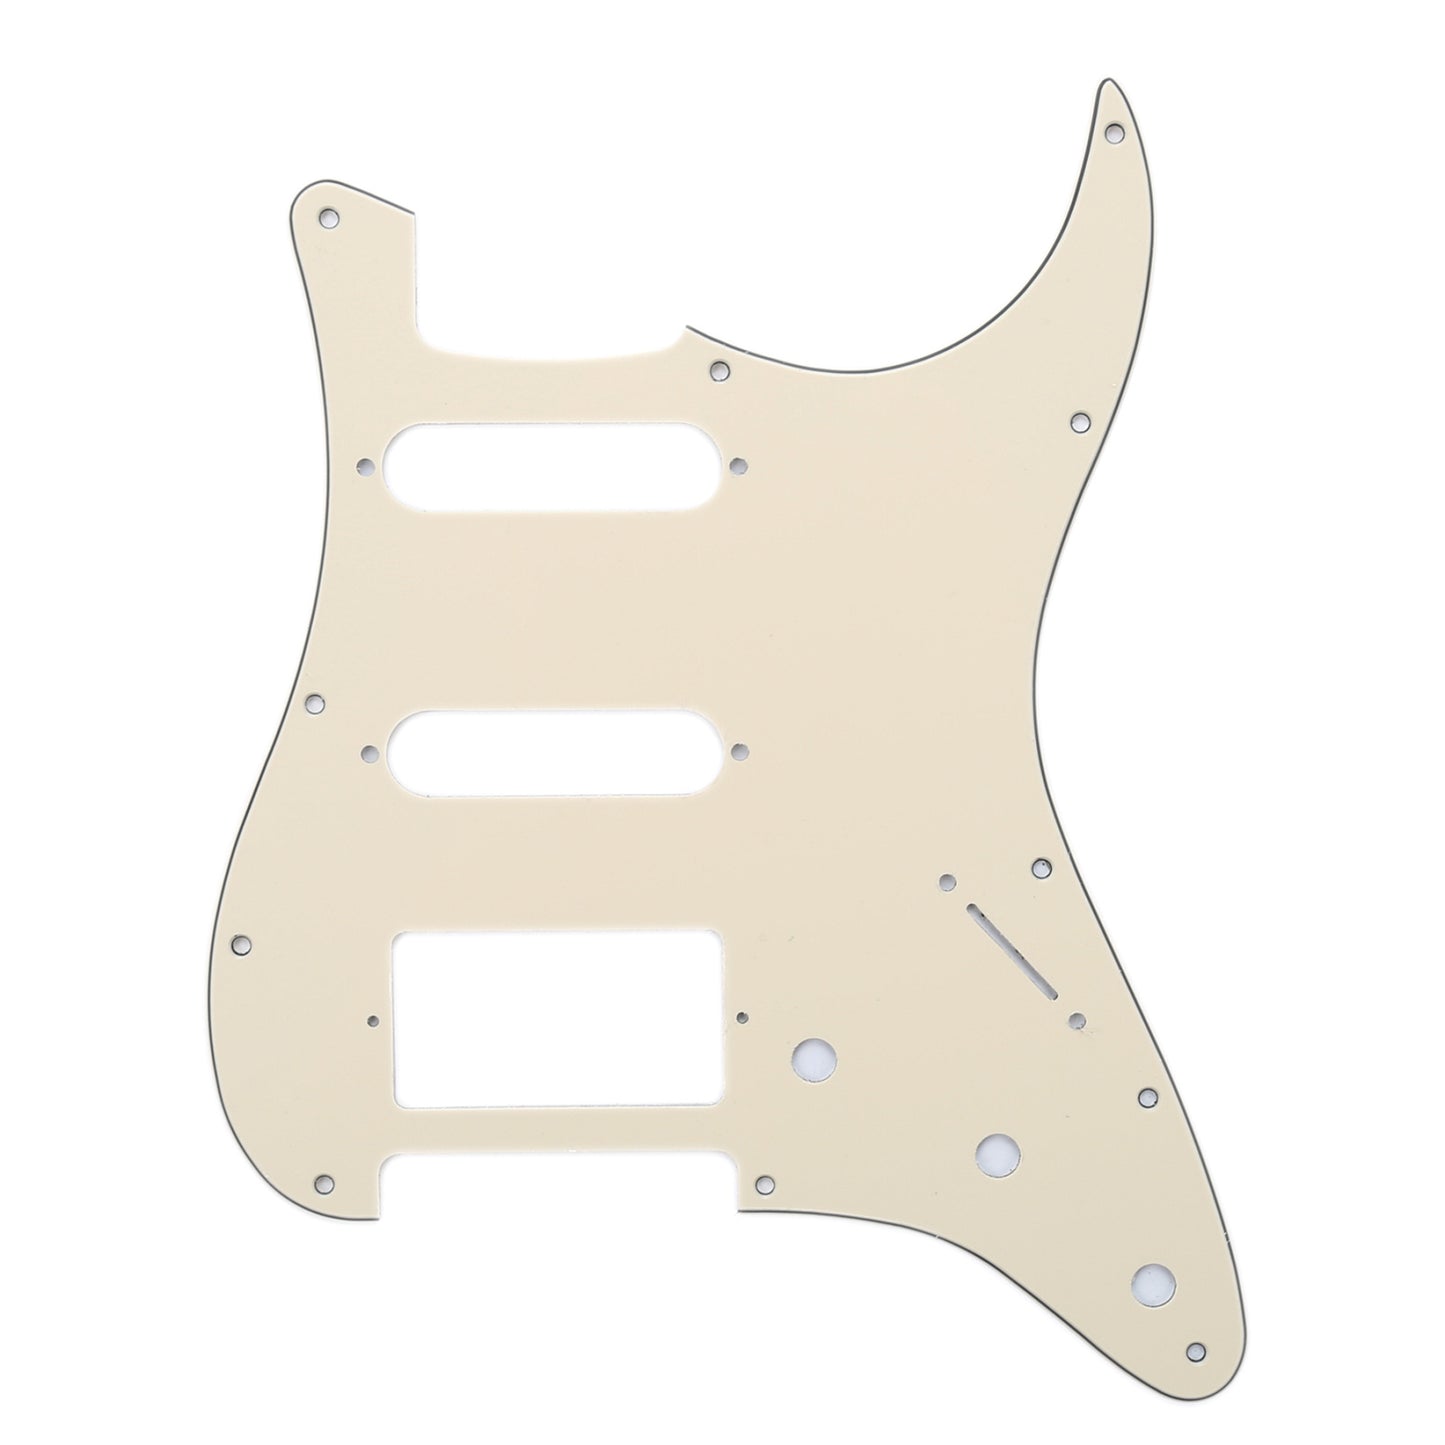 Musiclily HSS 11 Hole Guitar Strat Pickguard for Fender USA/Mexican Made Standard Stratocaster Modern Style,3Ply Cream